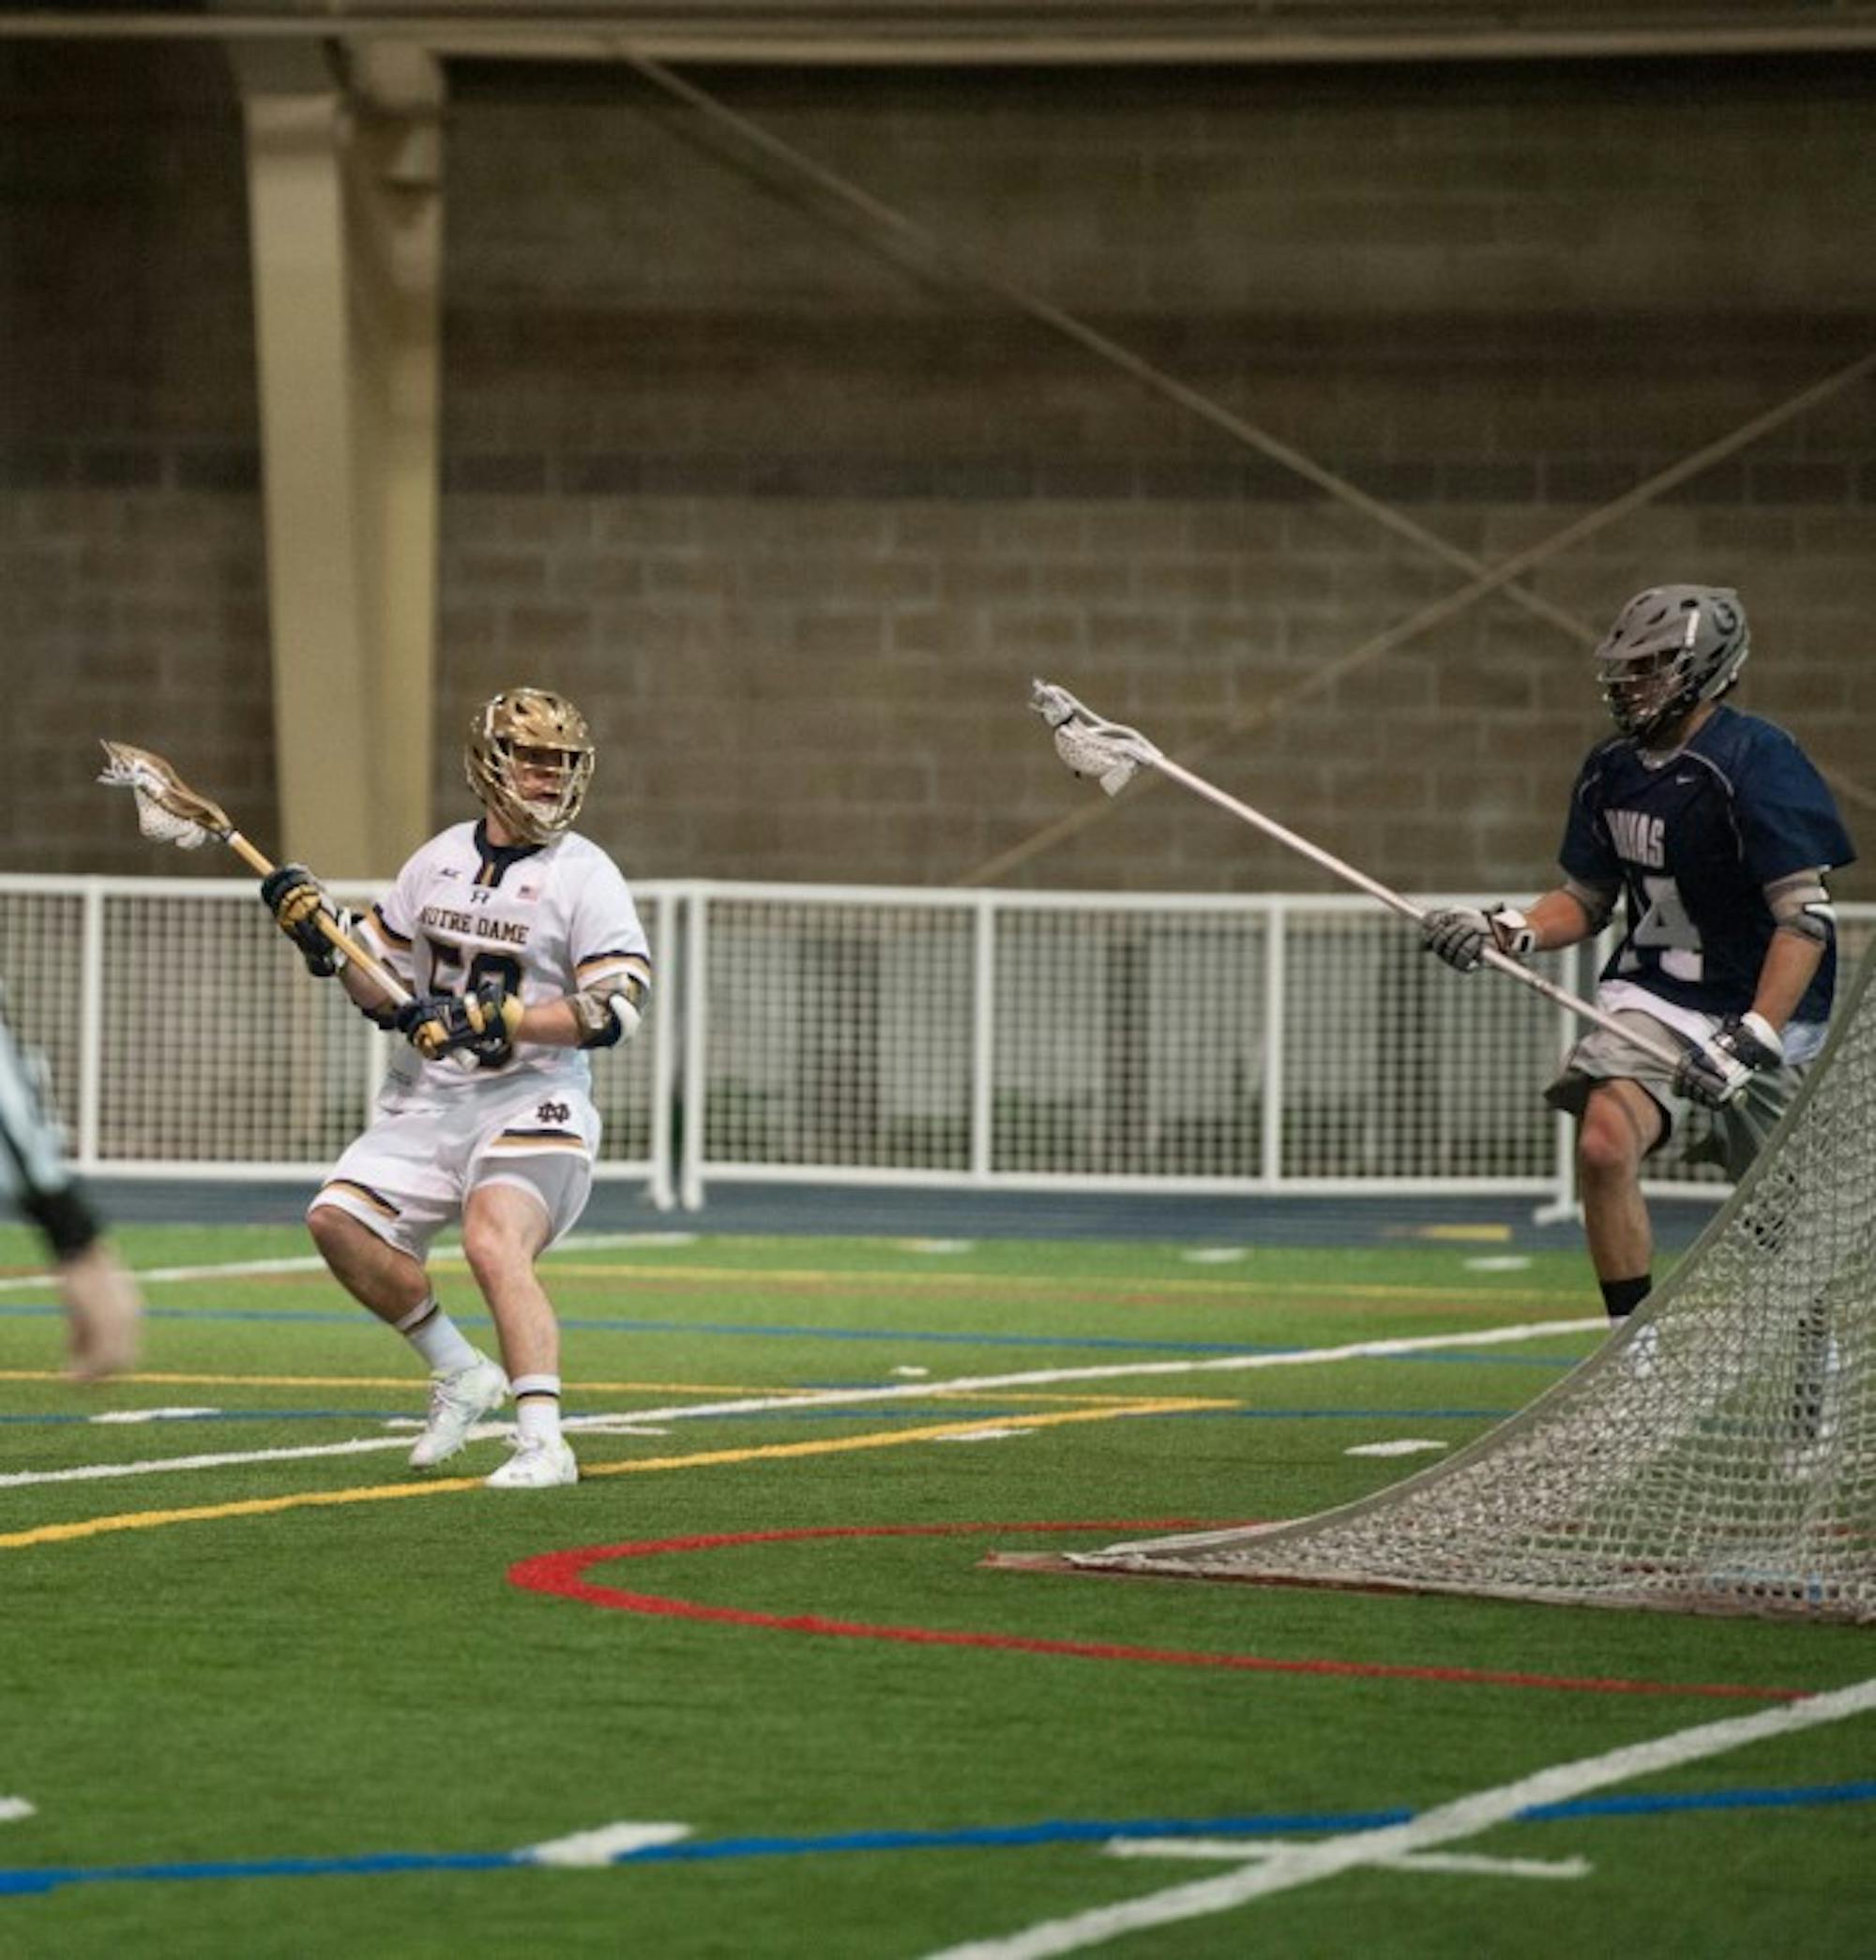 Junior attack Matt Kavanagh looks to pass in Notre Dame’s 14-12 win against Georgetown on Feb. 14 at Loftus Sports Center.